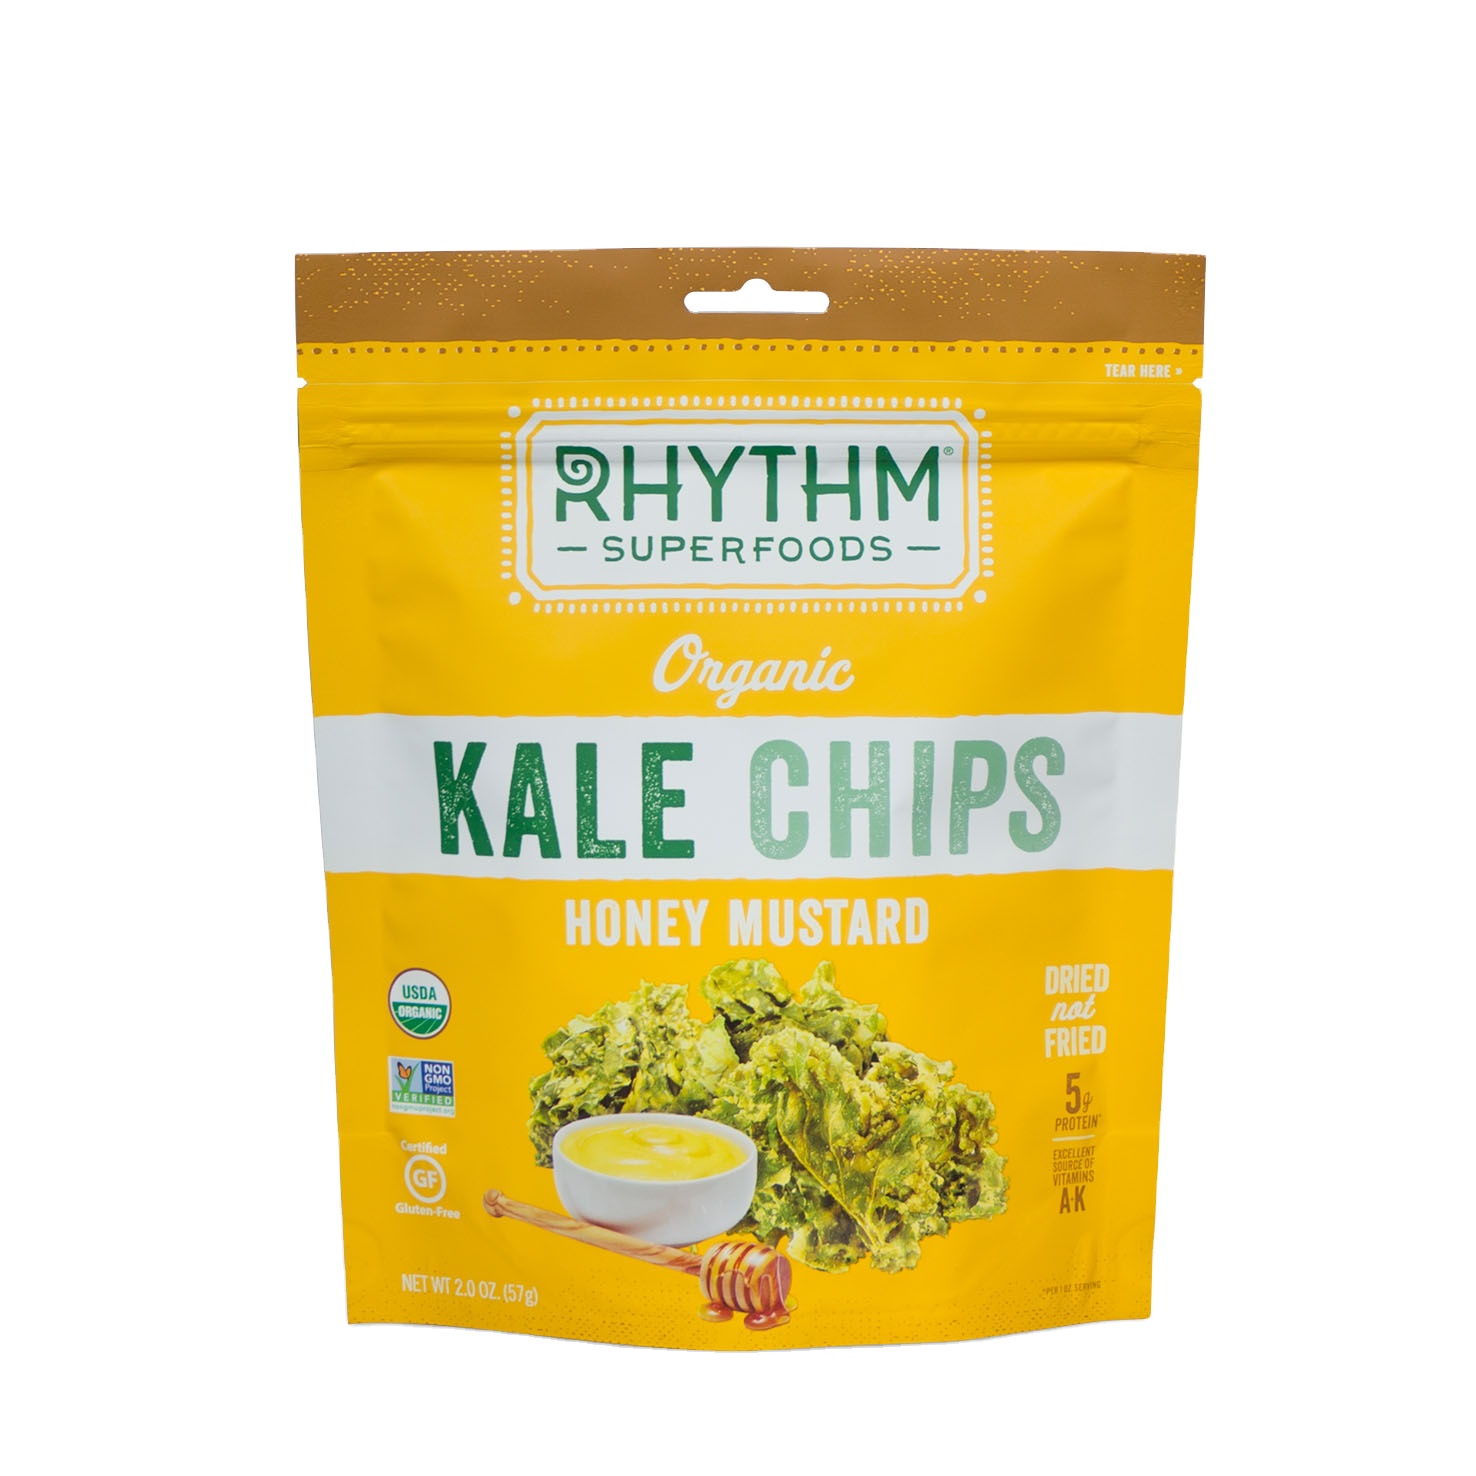 Kale Chips Stand Up Pouch With Zipper laser score Matt Surface UV Bag Grip Seal Snack Packaging pouch